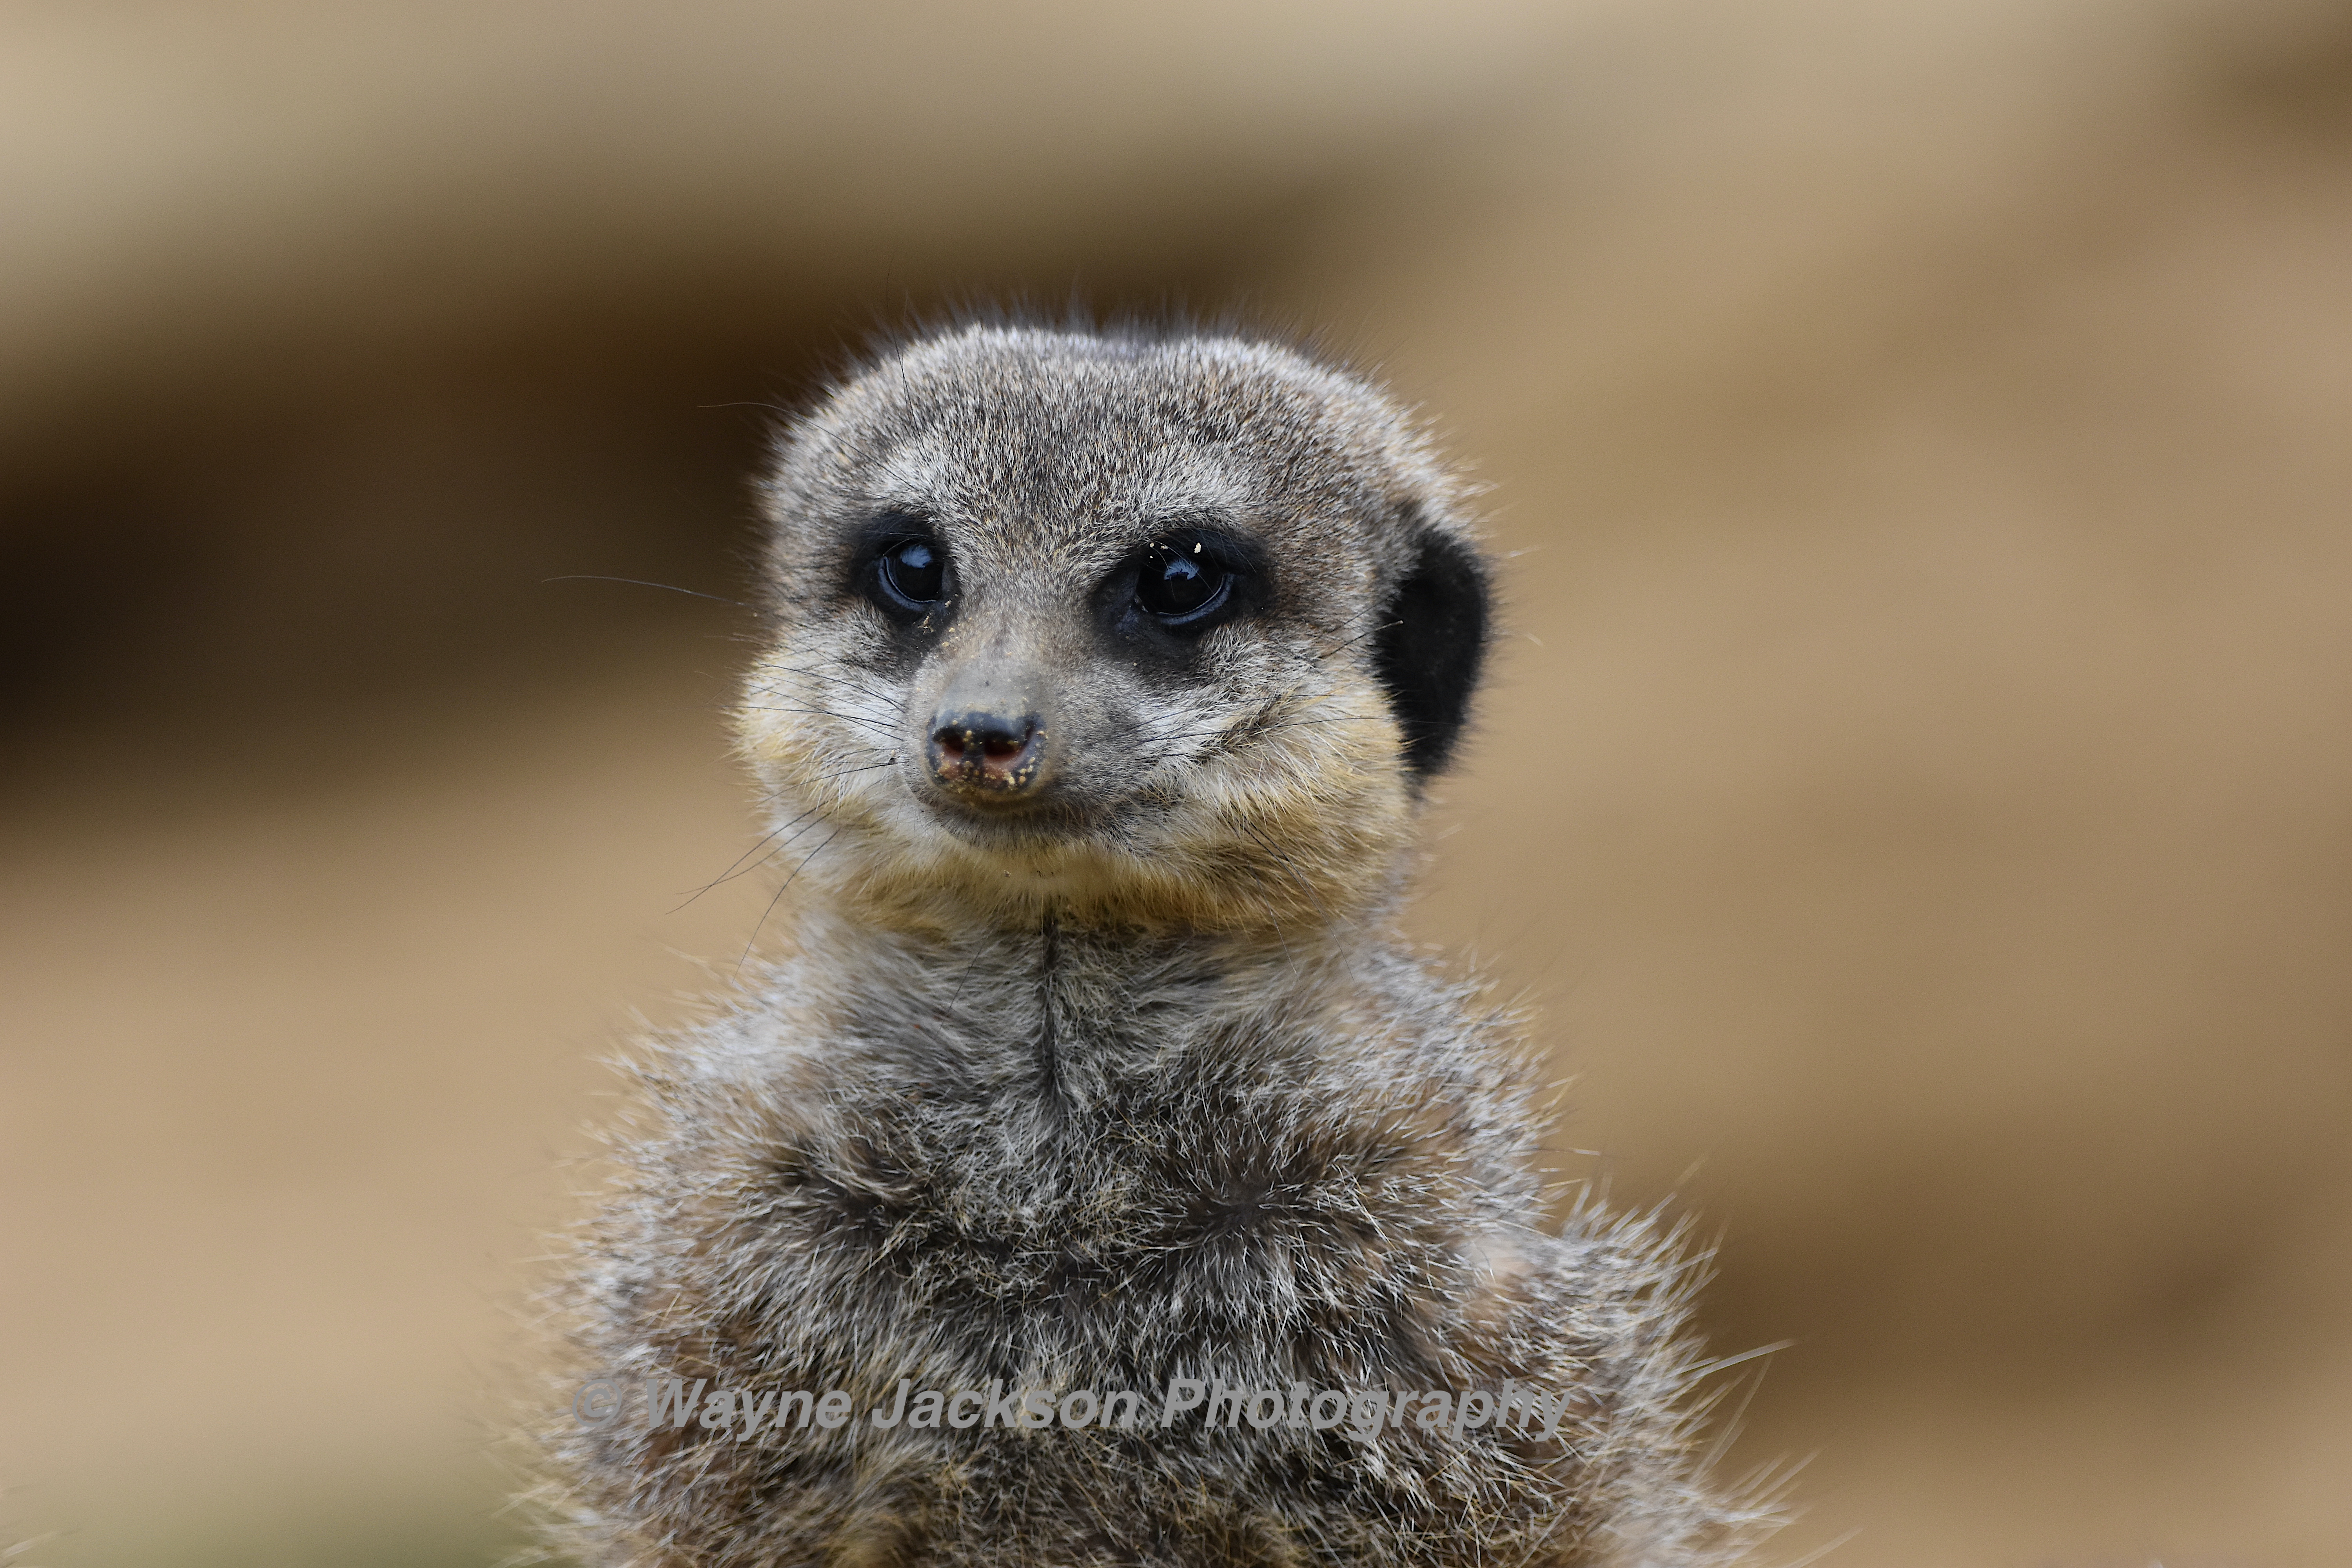 A single meerkat with a blurred dark background